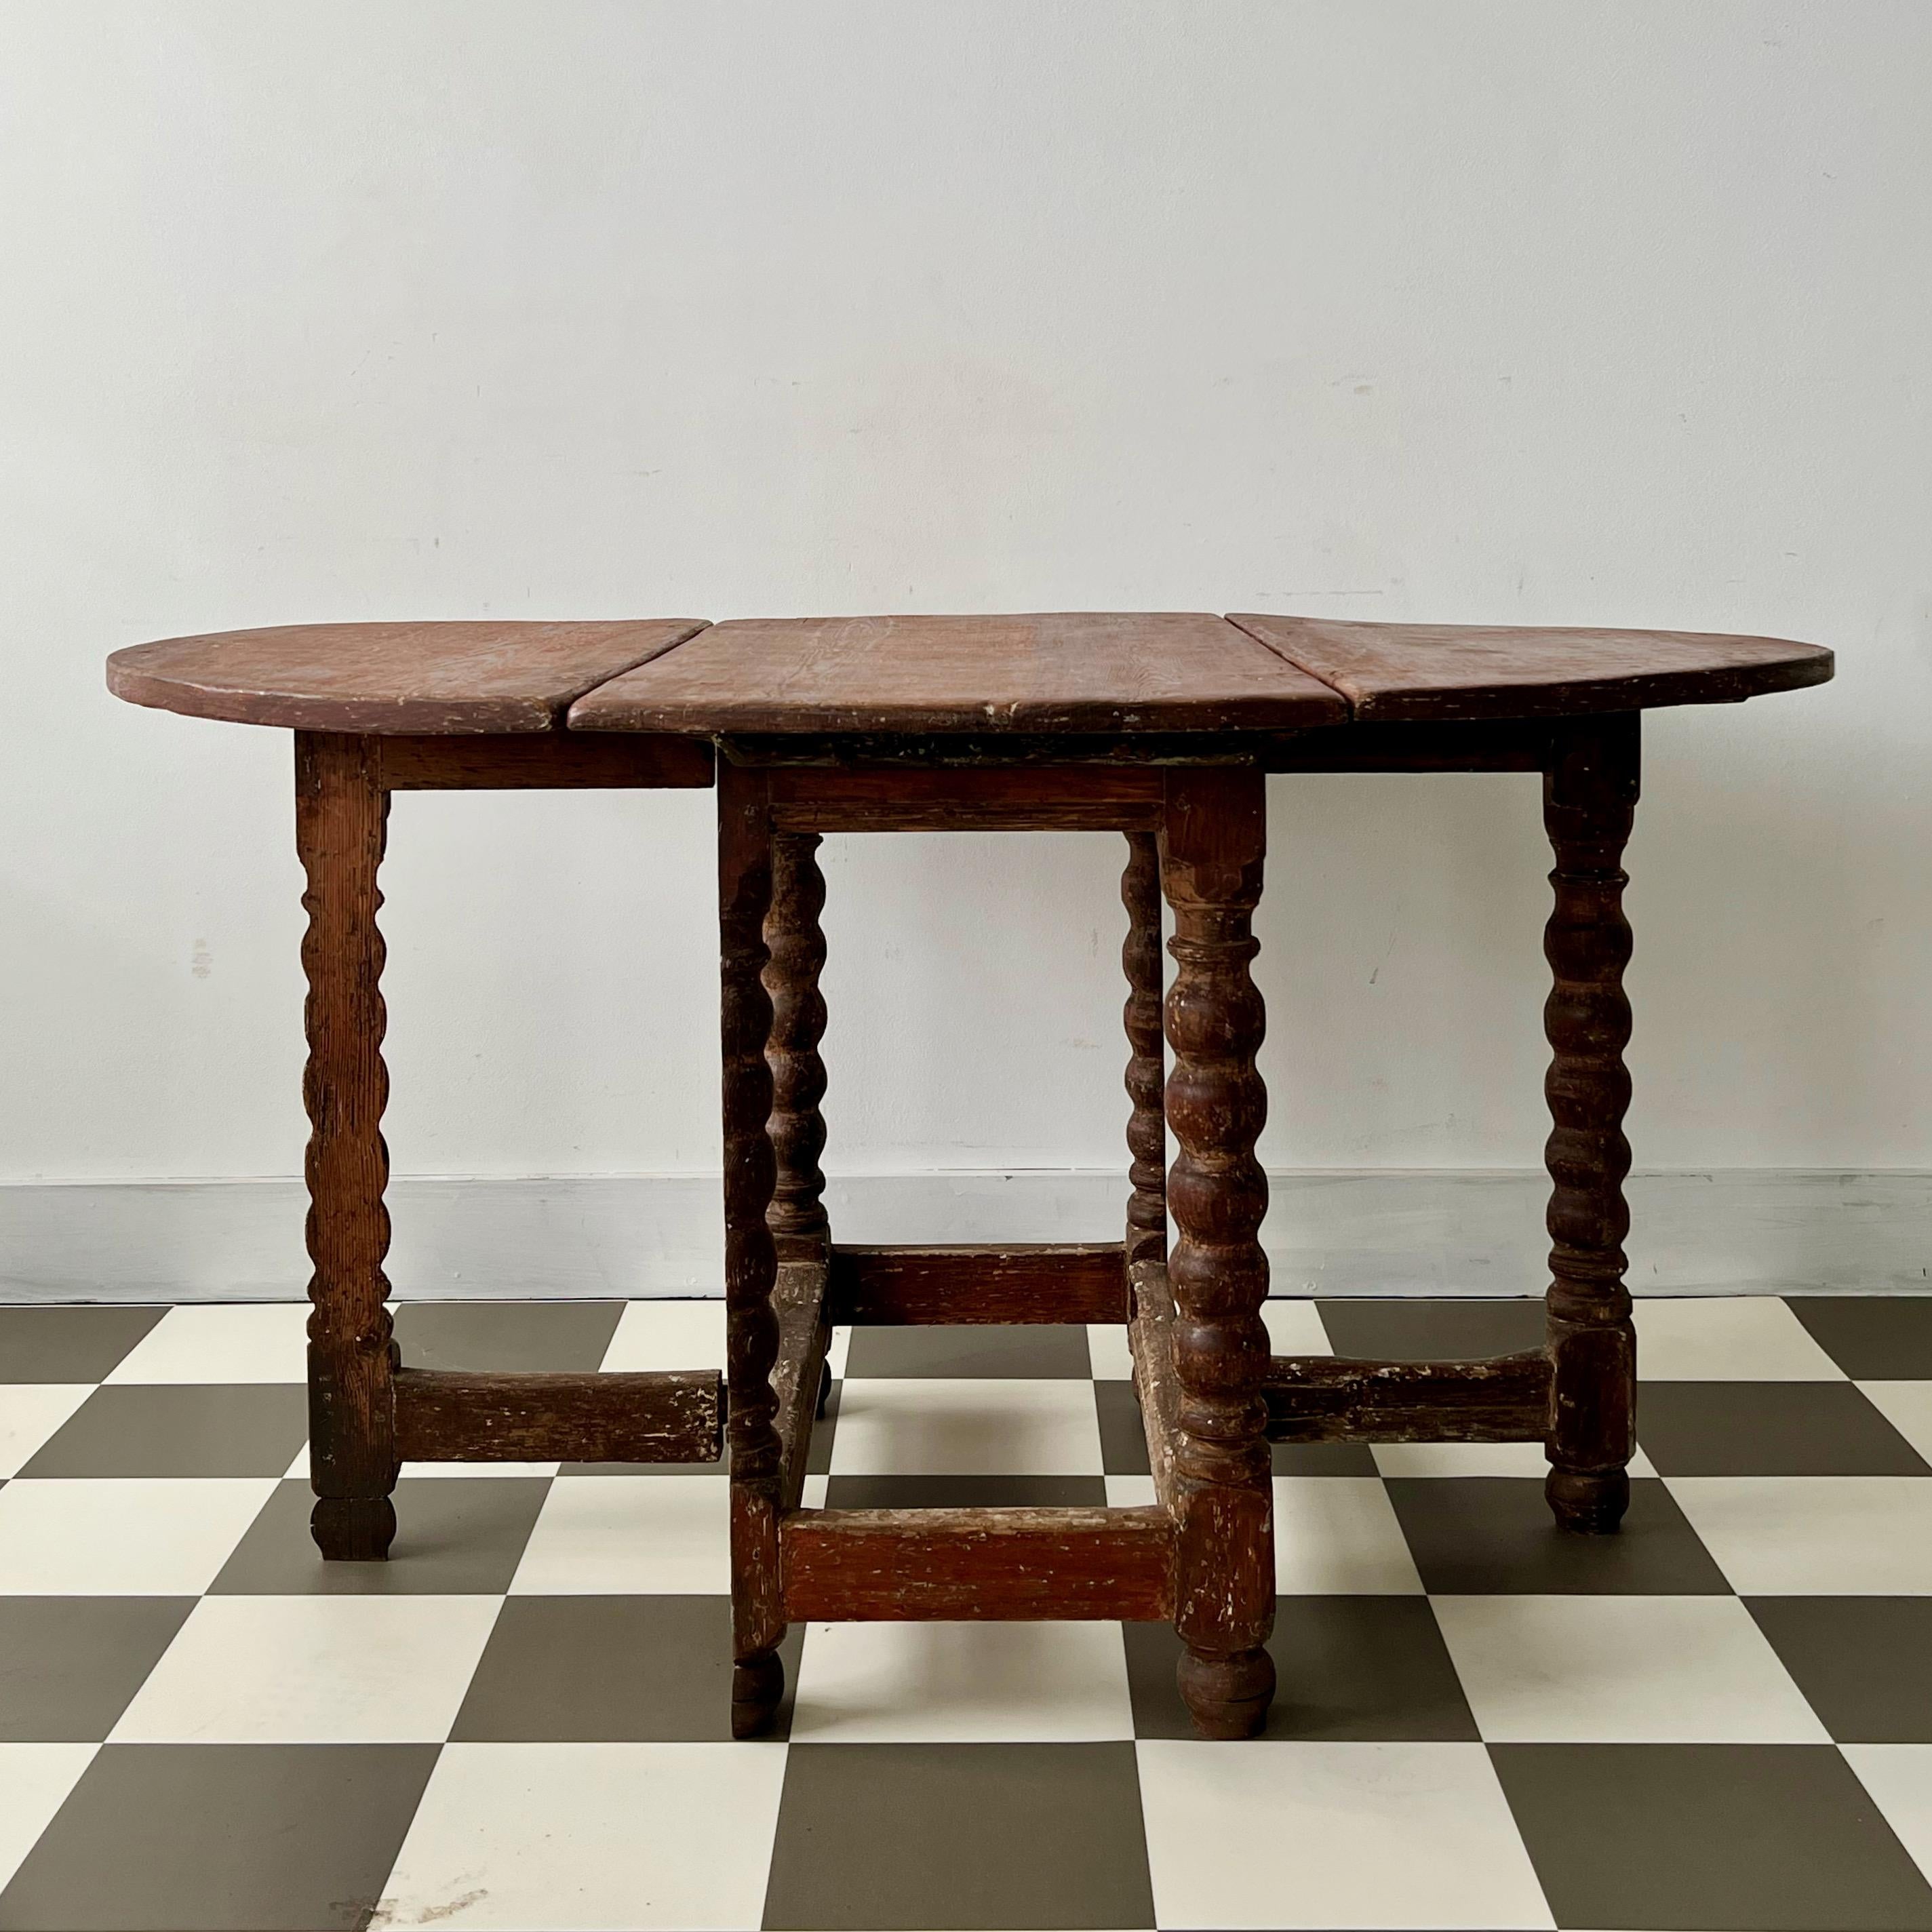 18th century Swedish Baroque drop leaf table with leg support on each side- extending table to 55